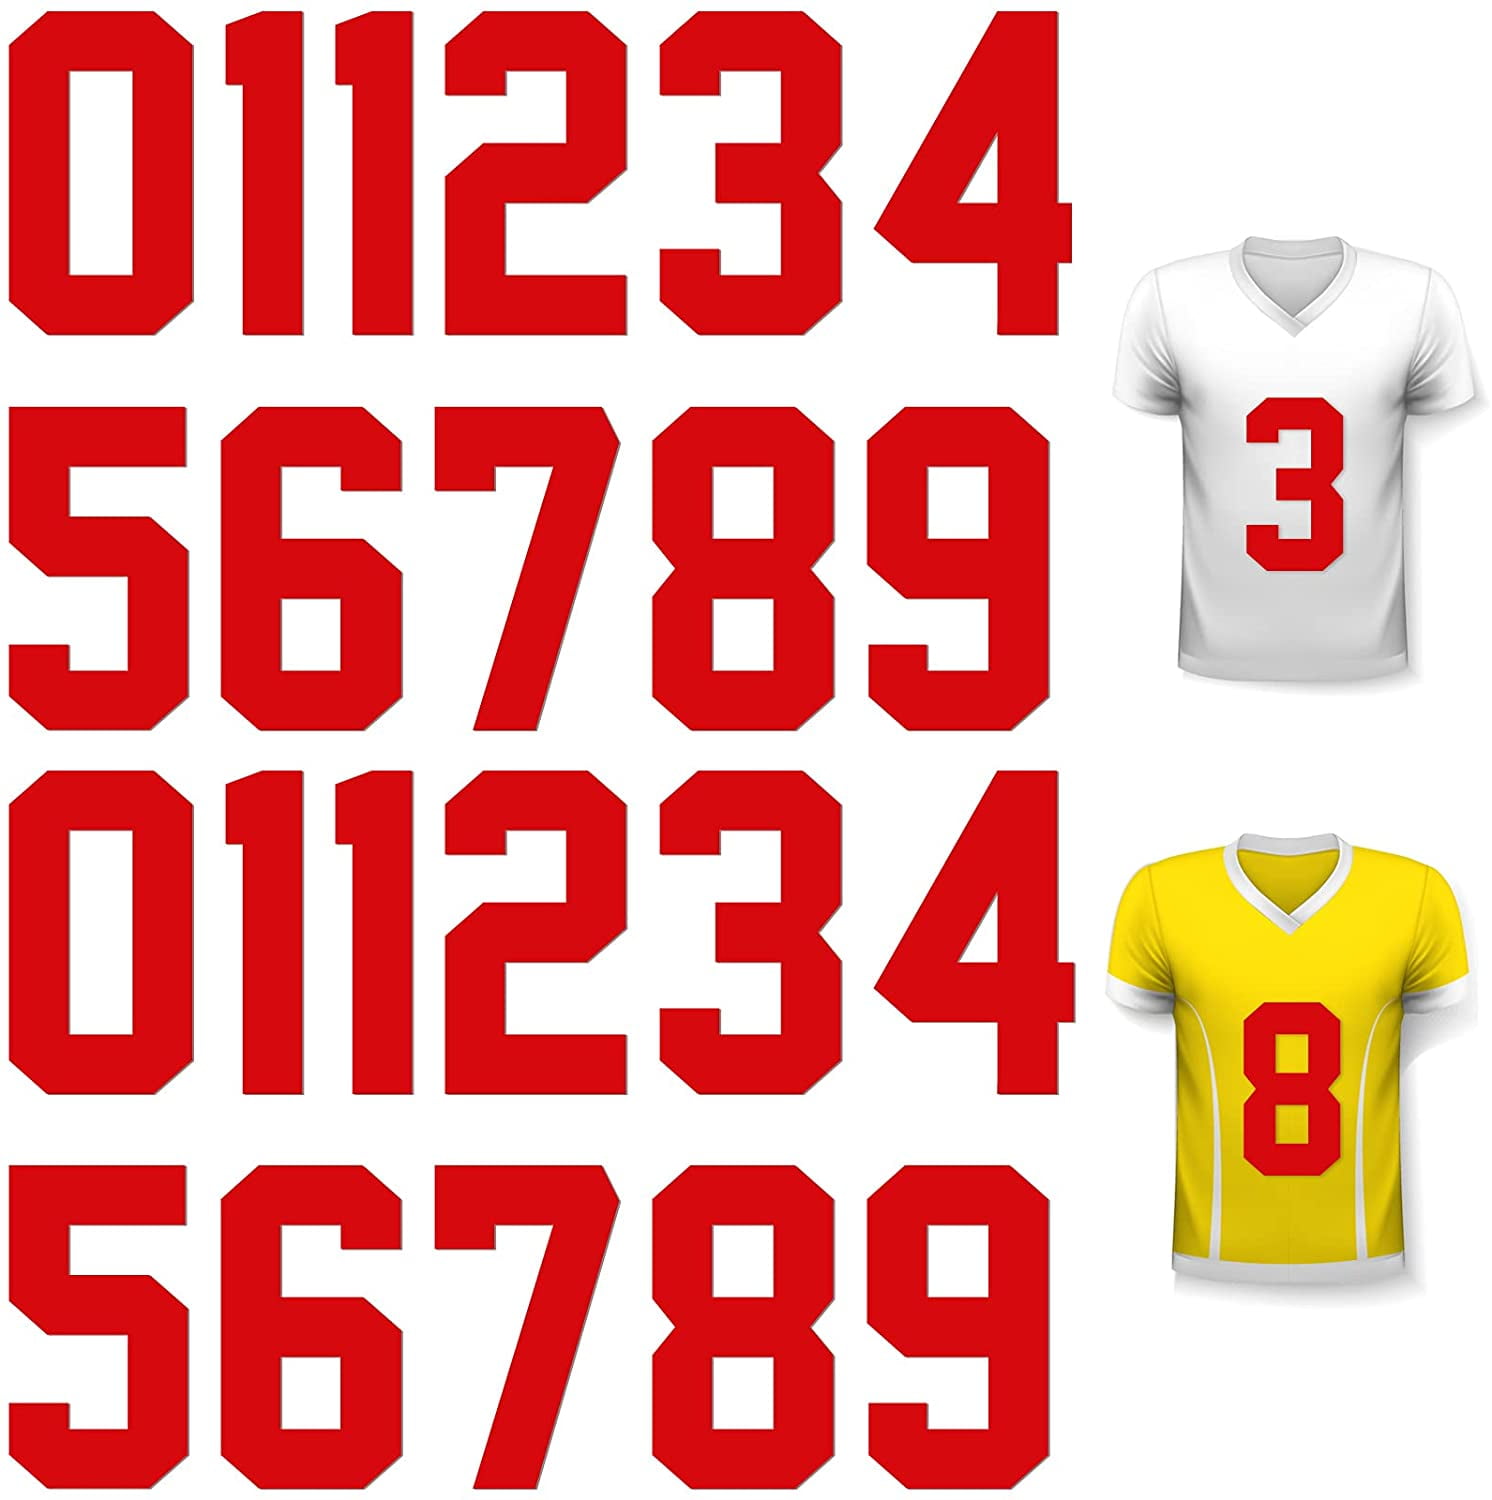 Soccer Iron-on Numbers 3 Line